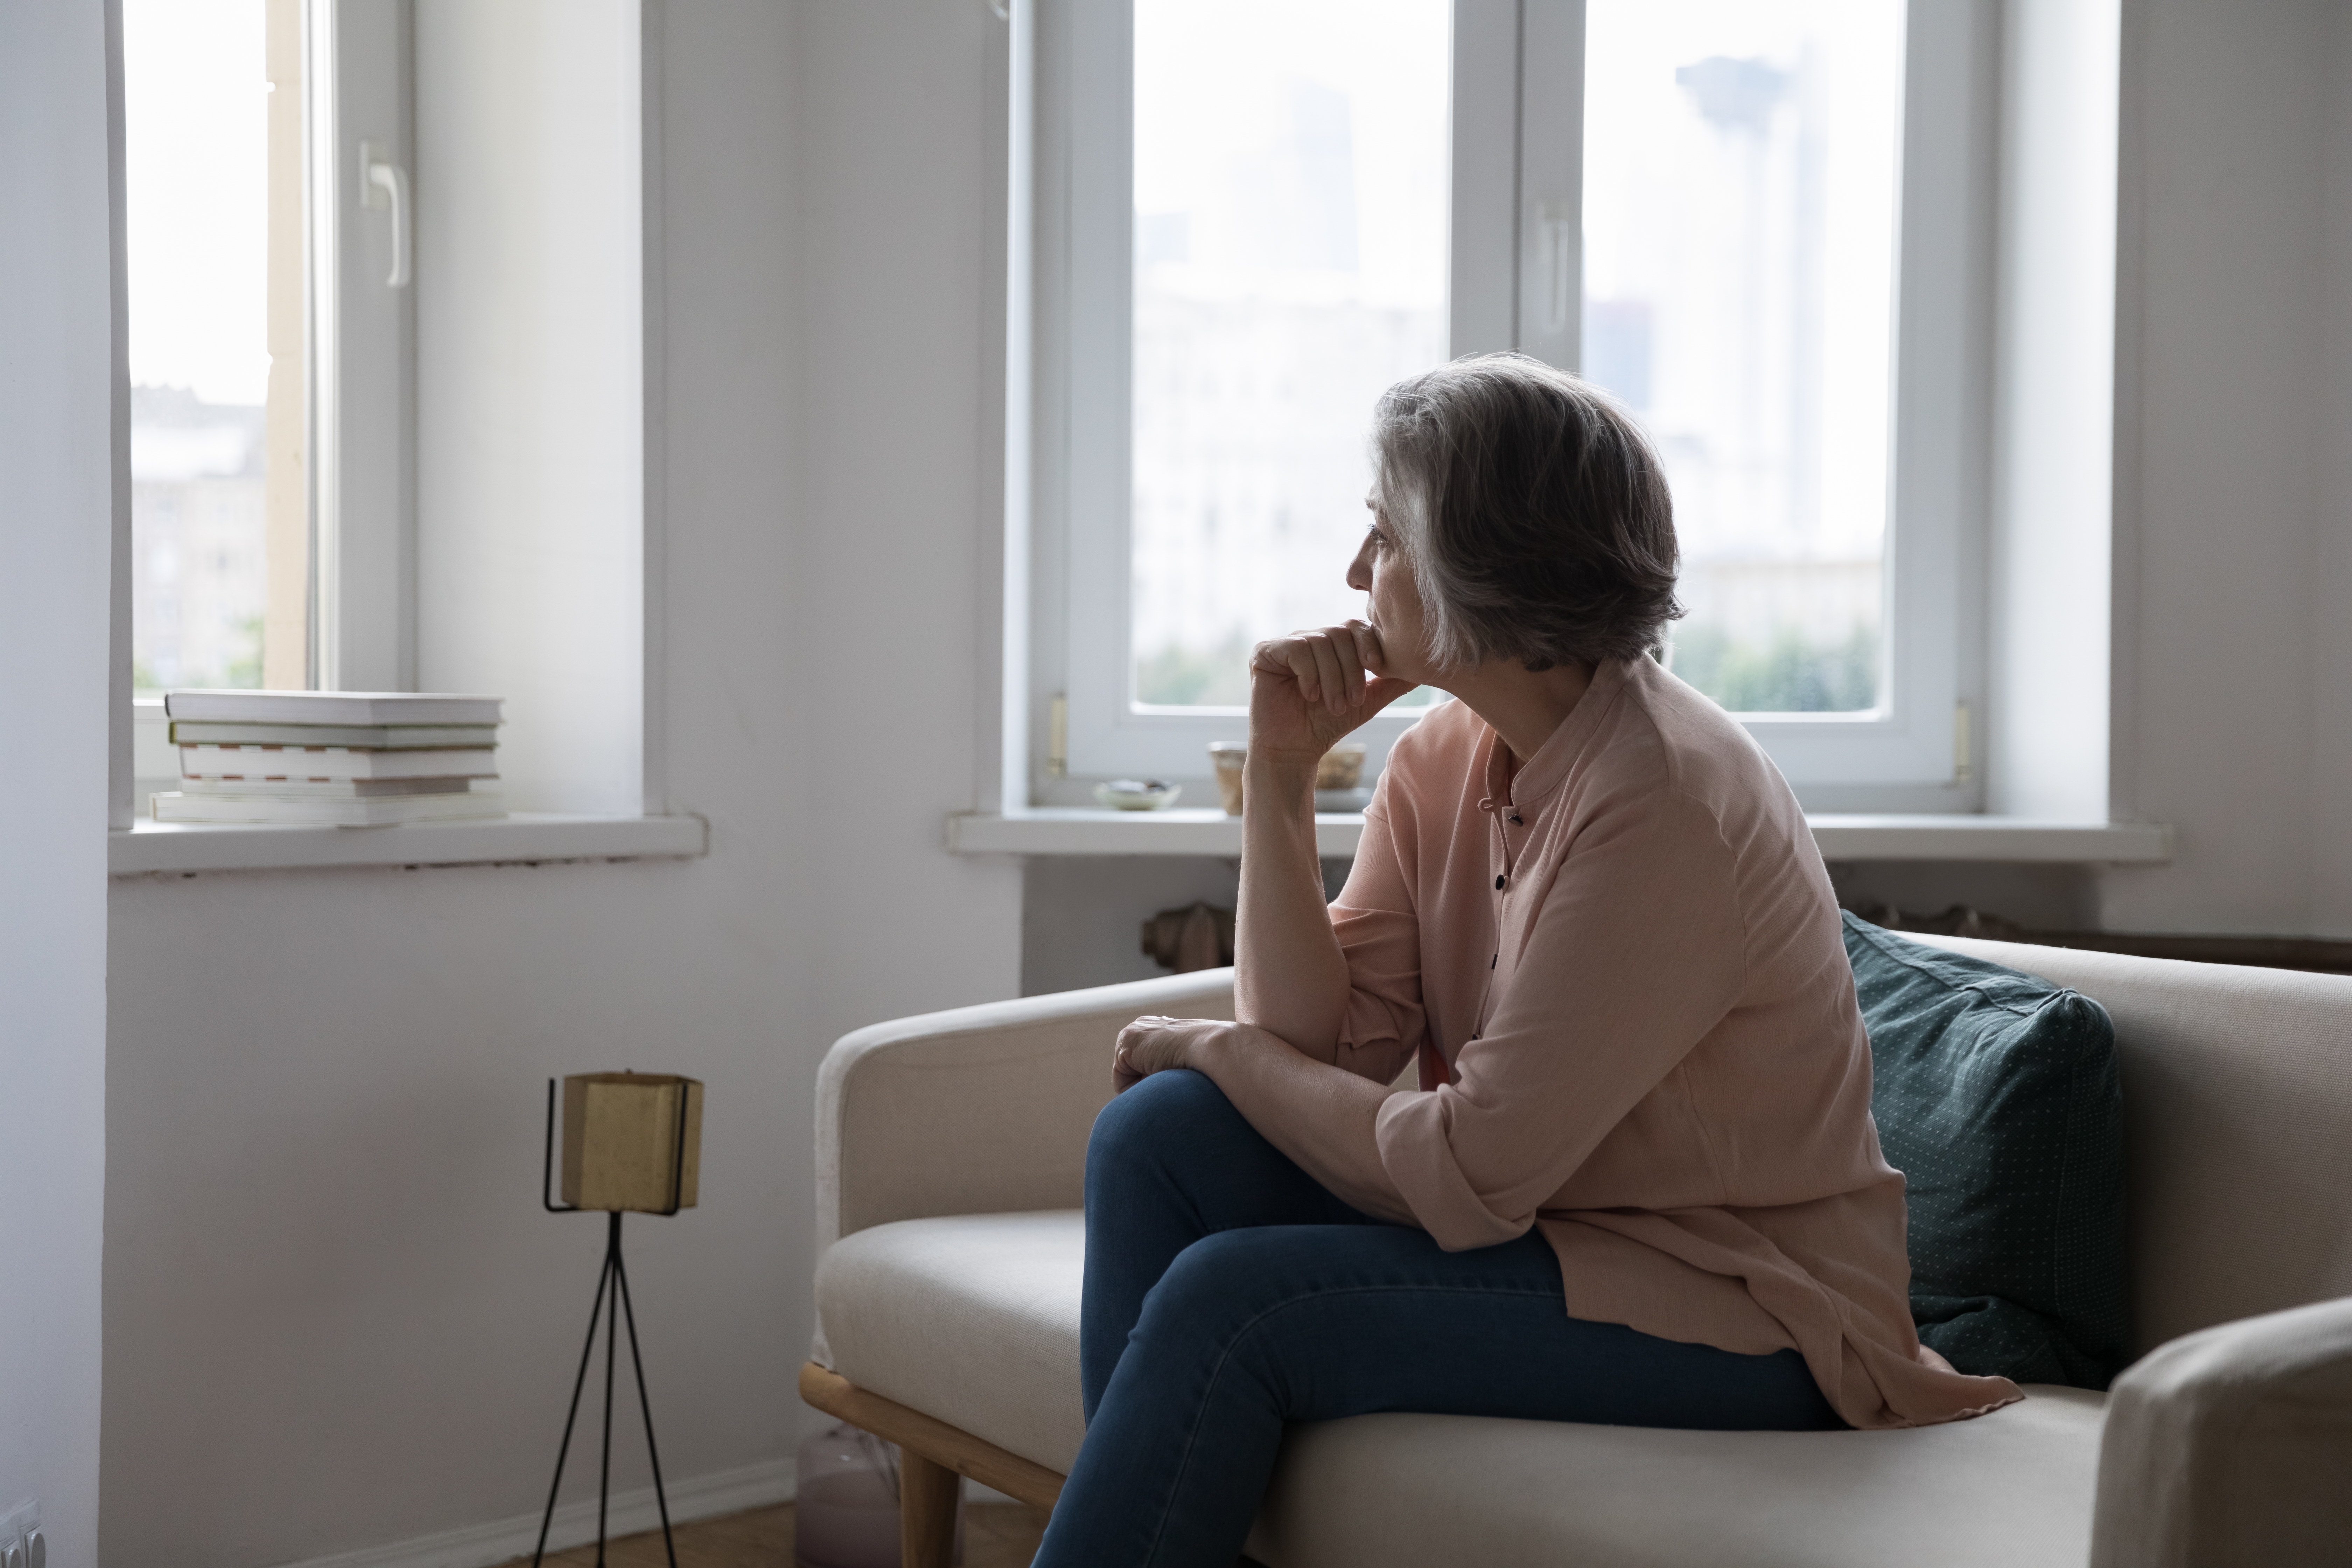 Middle aged woman looking at window sadly, contemplating health issues